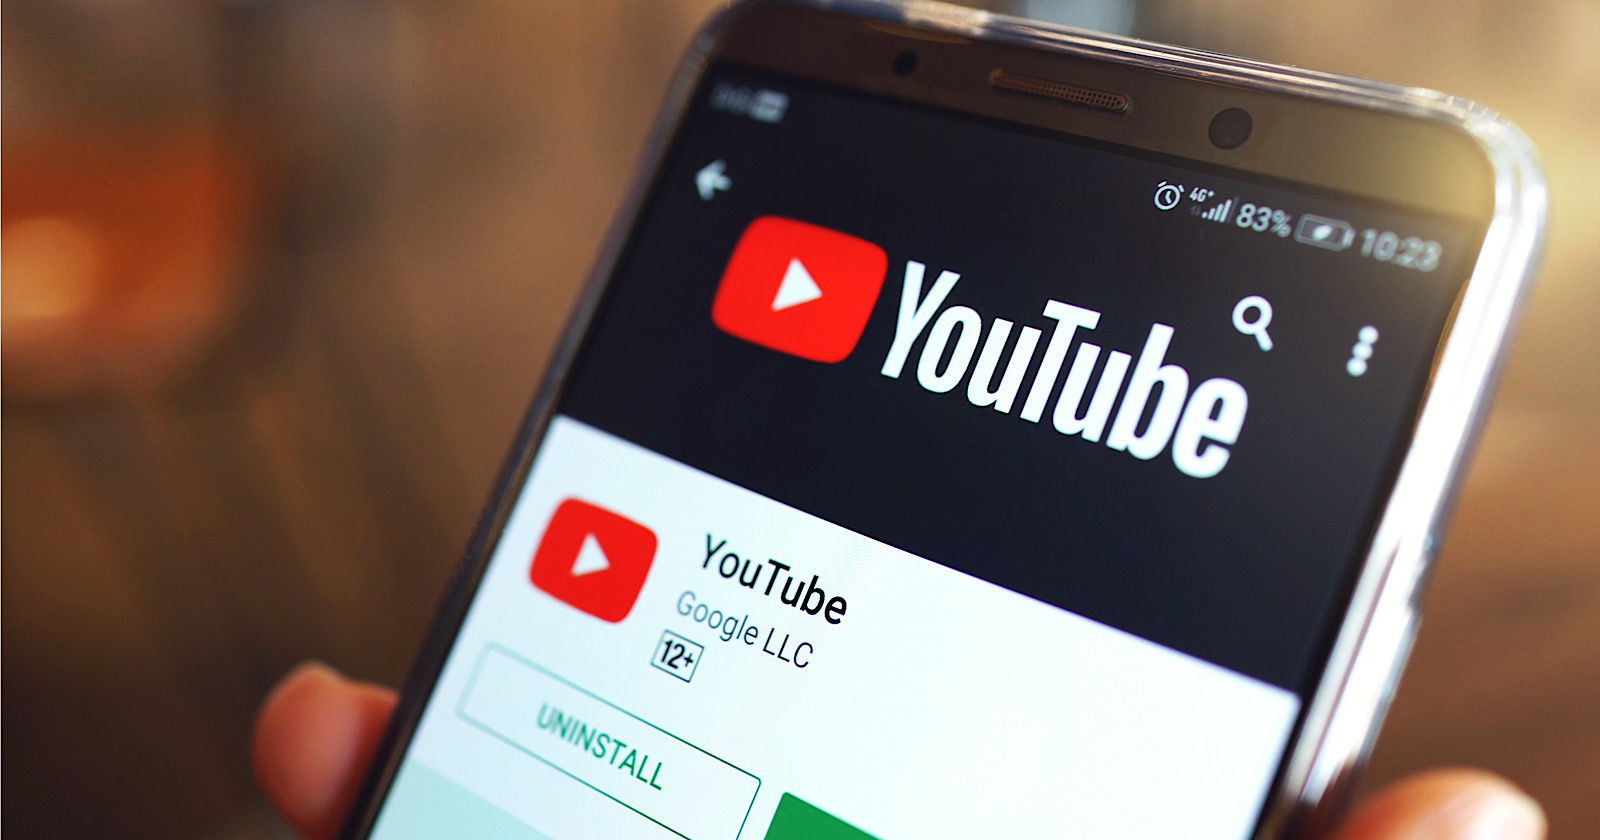 YouTube Replaces the 'Trending' Tab With New 'Explore' Tab on Mobile